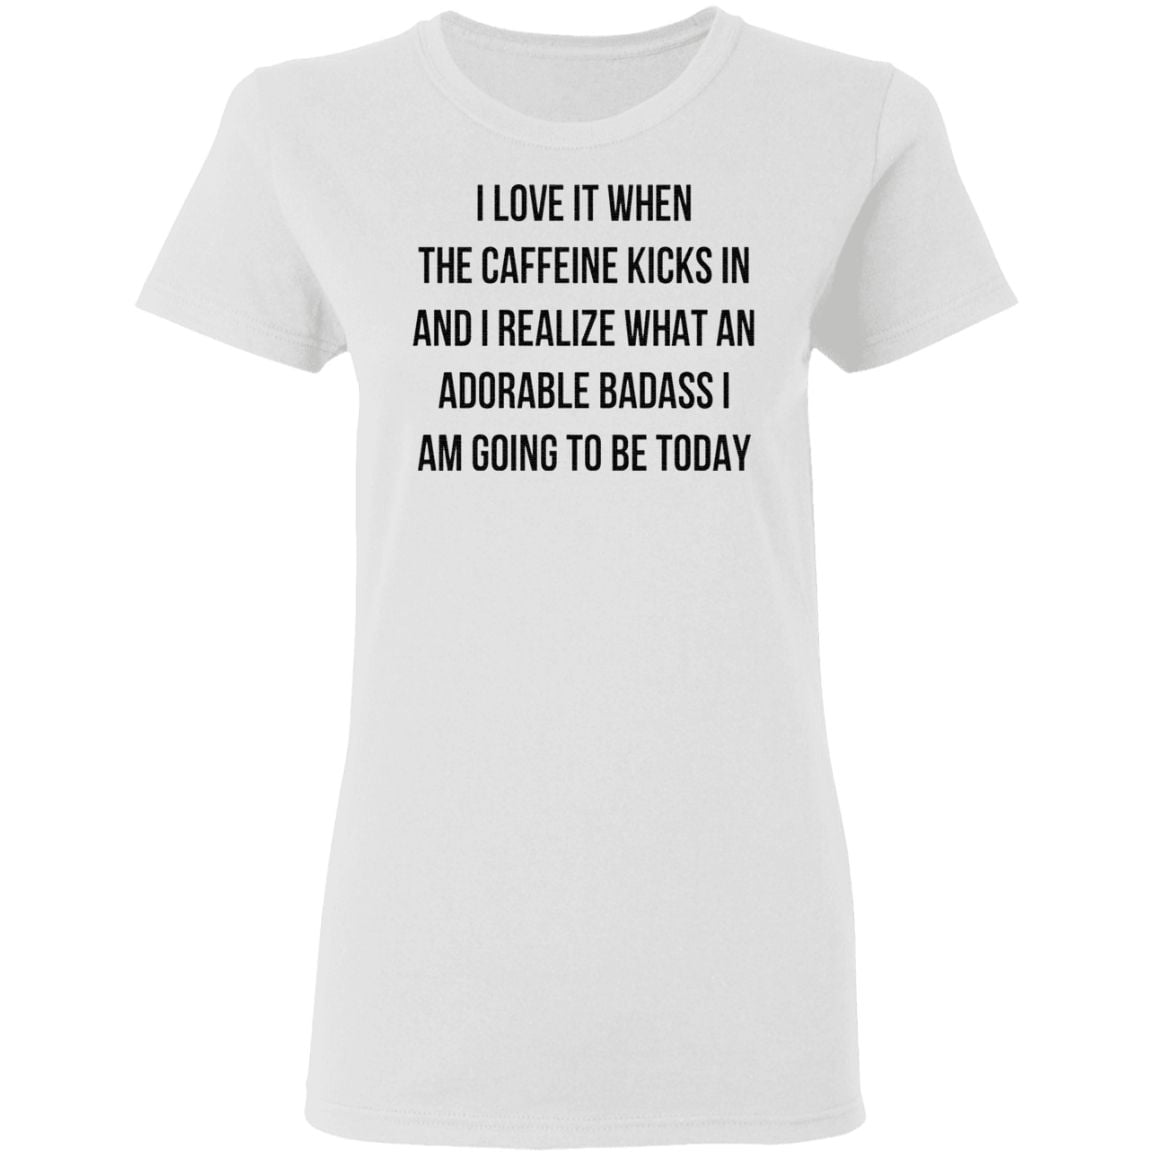 I Love It When The Caffeine Kicks In And I Realize That An Adorable Badass I Am Going To Be Today TShirt